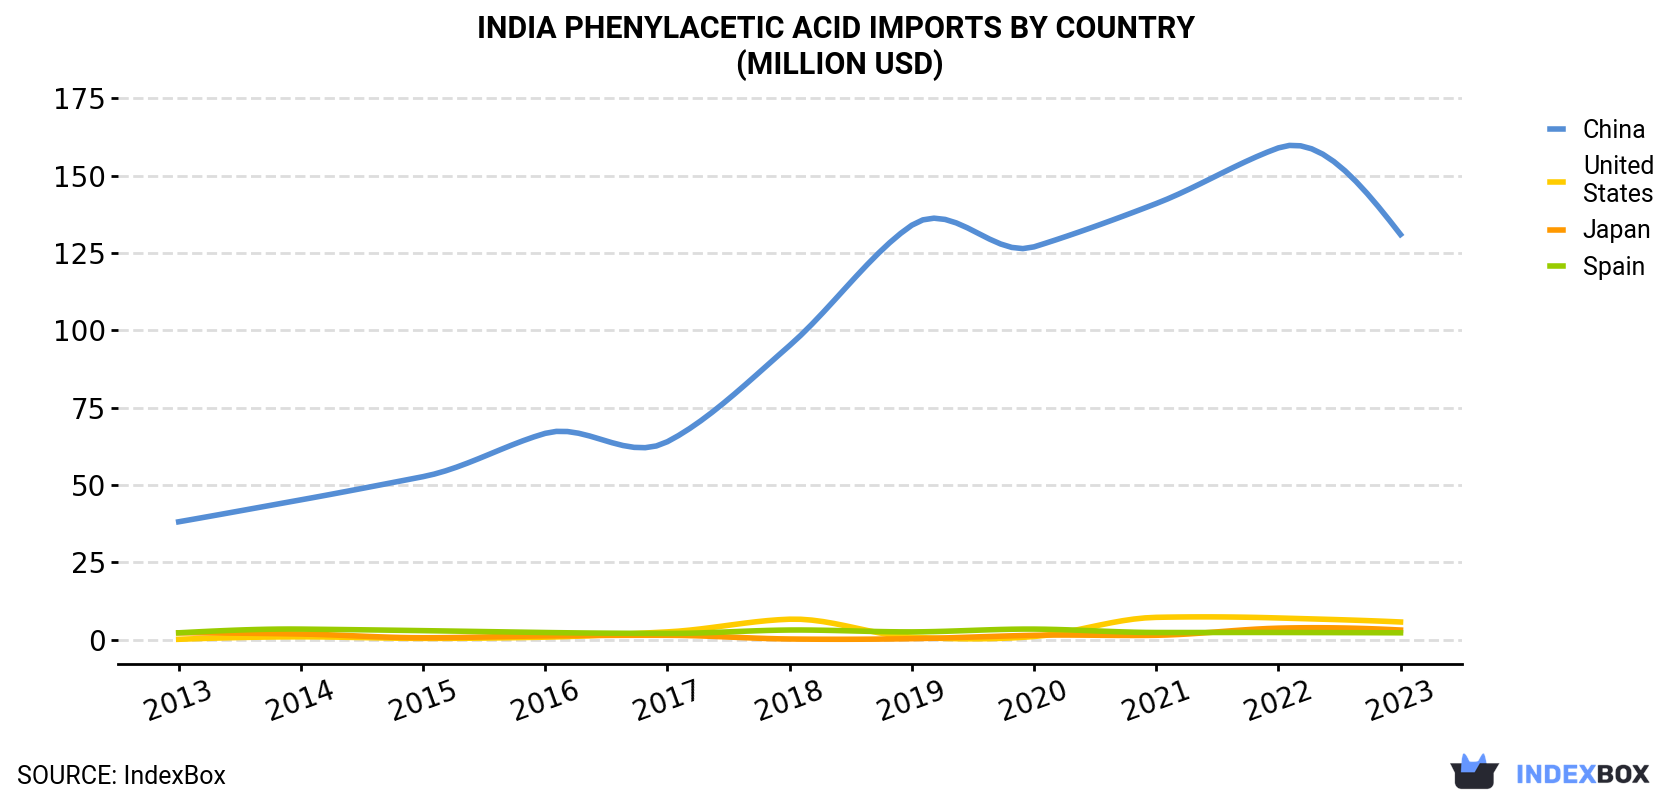 India Phenylacetic Acid Imports By Country (Million USD)